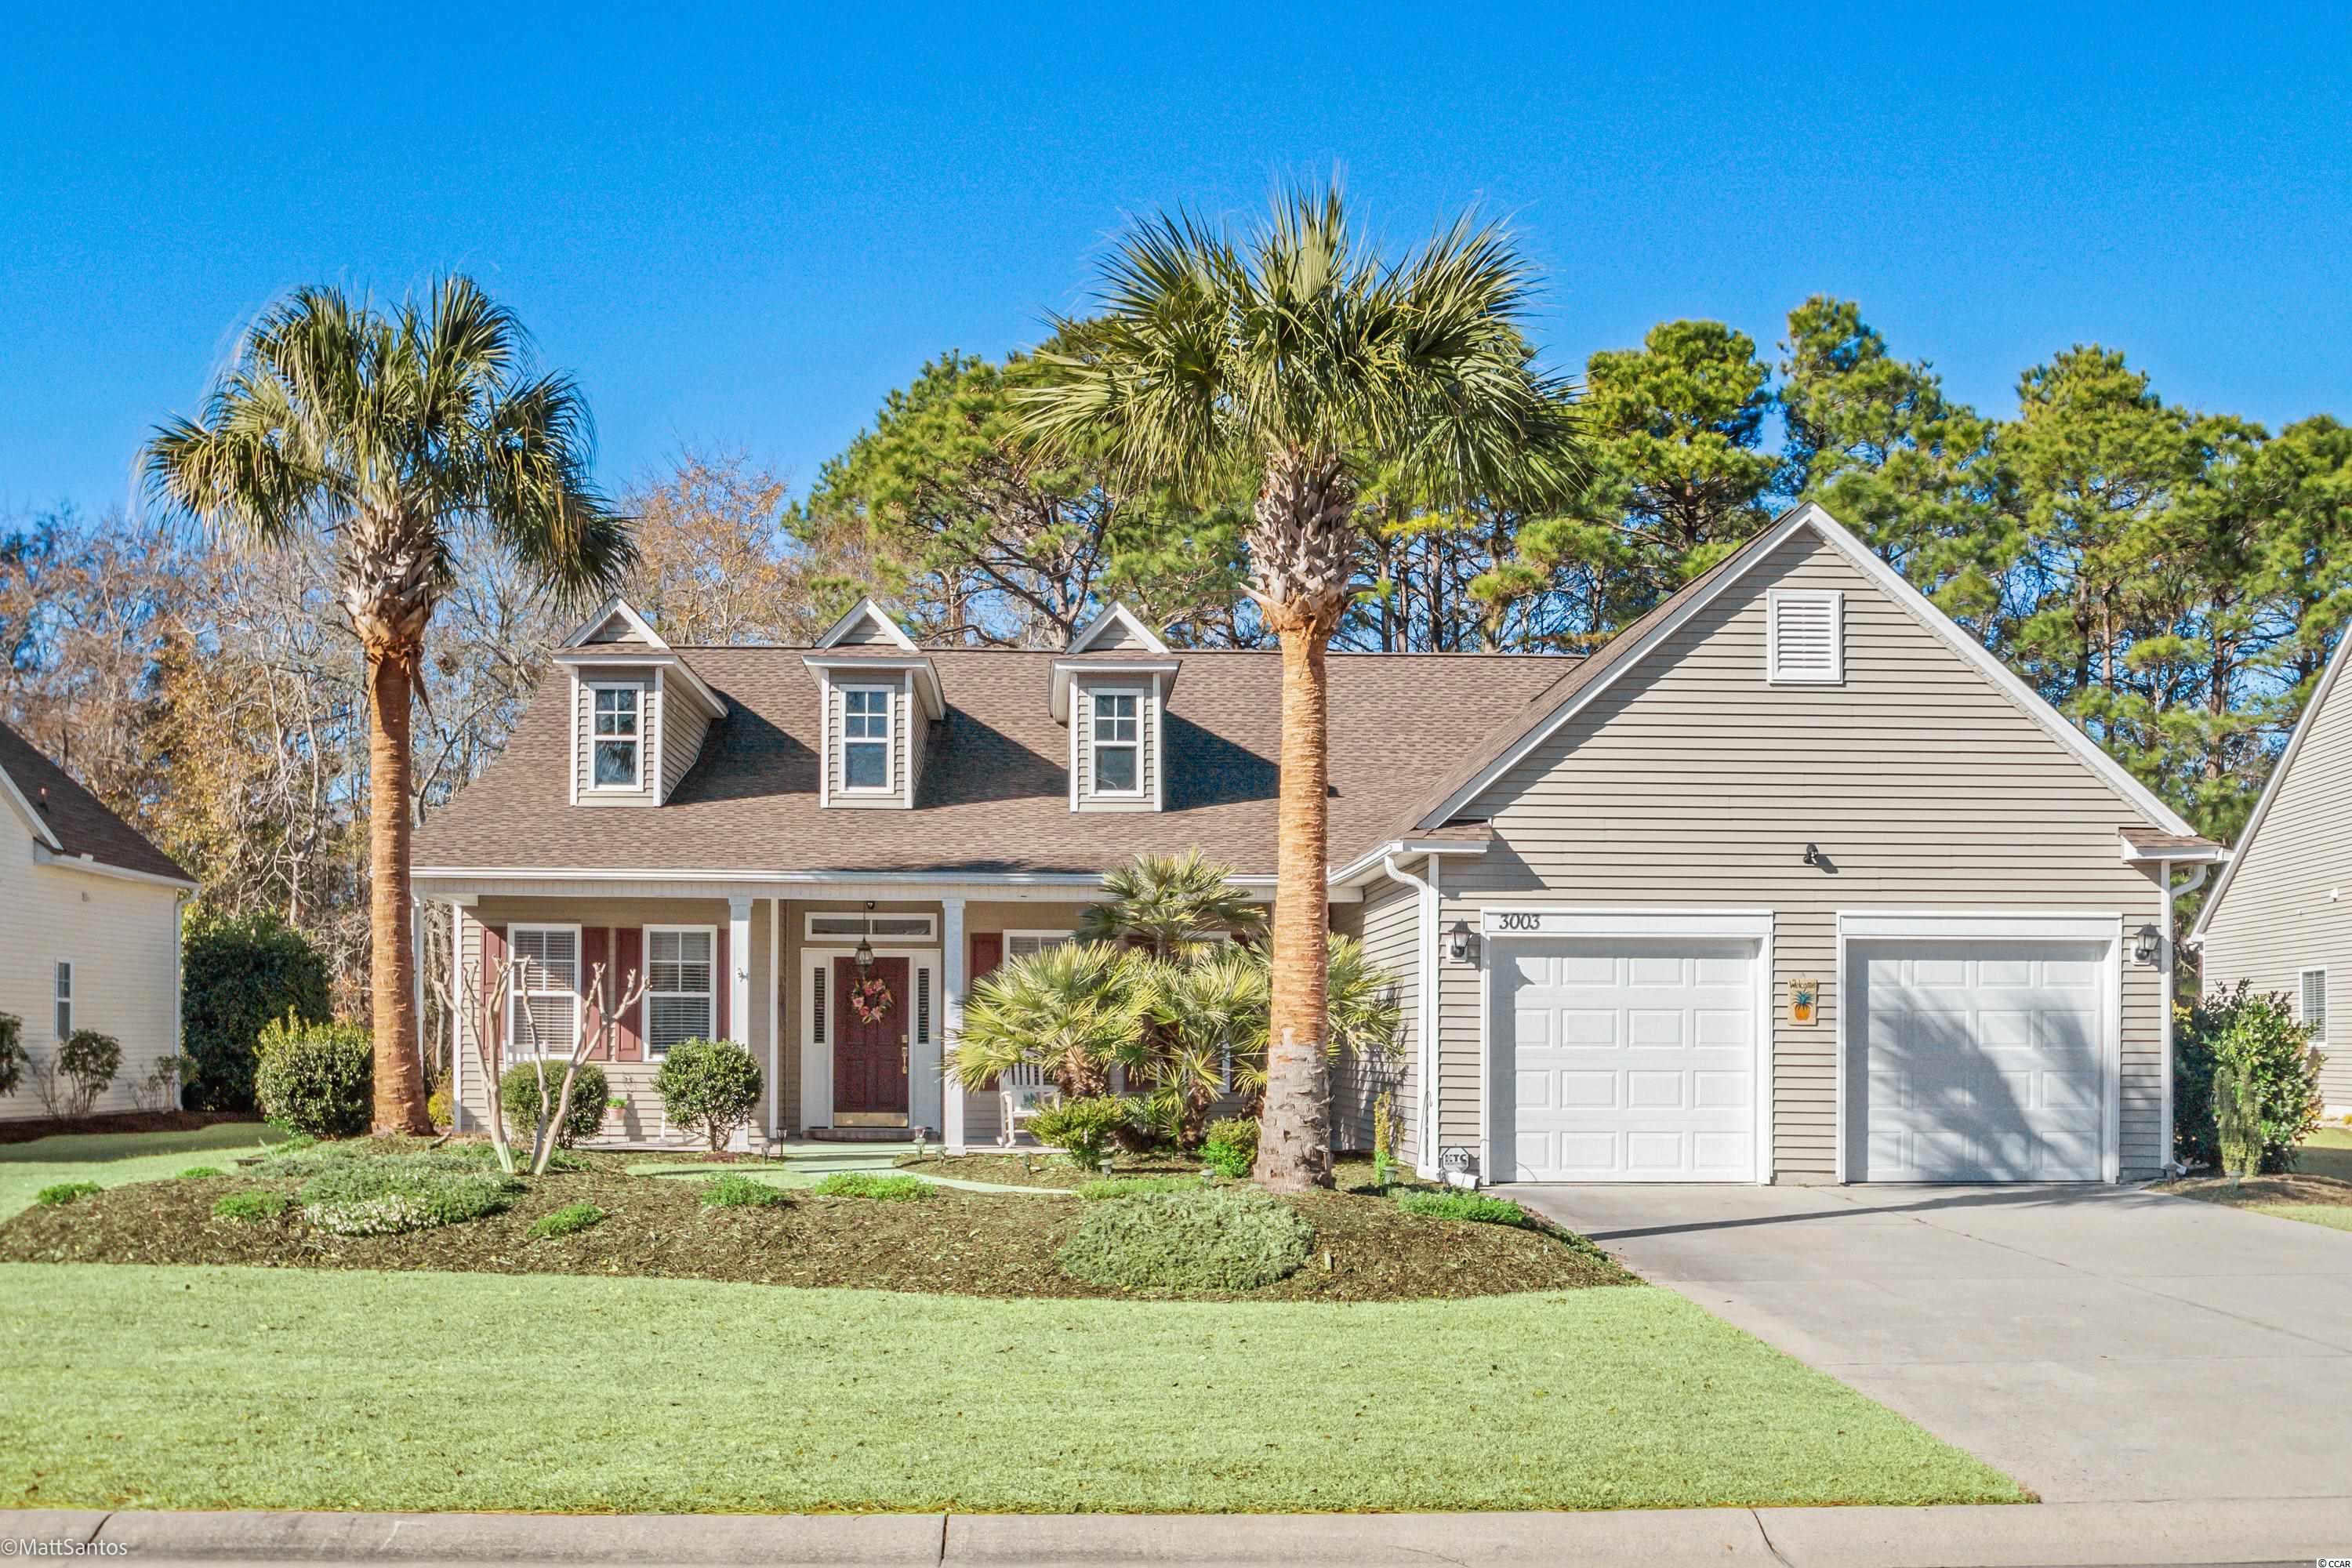 3003 Winding River Rd. North Myrtle Beach, SC 29582